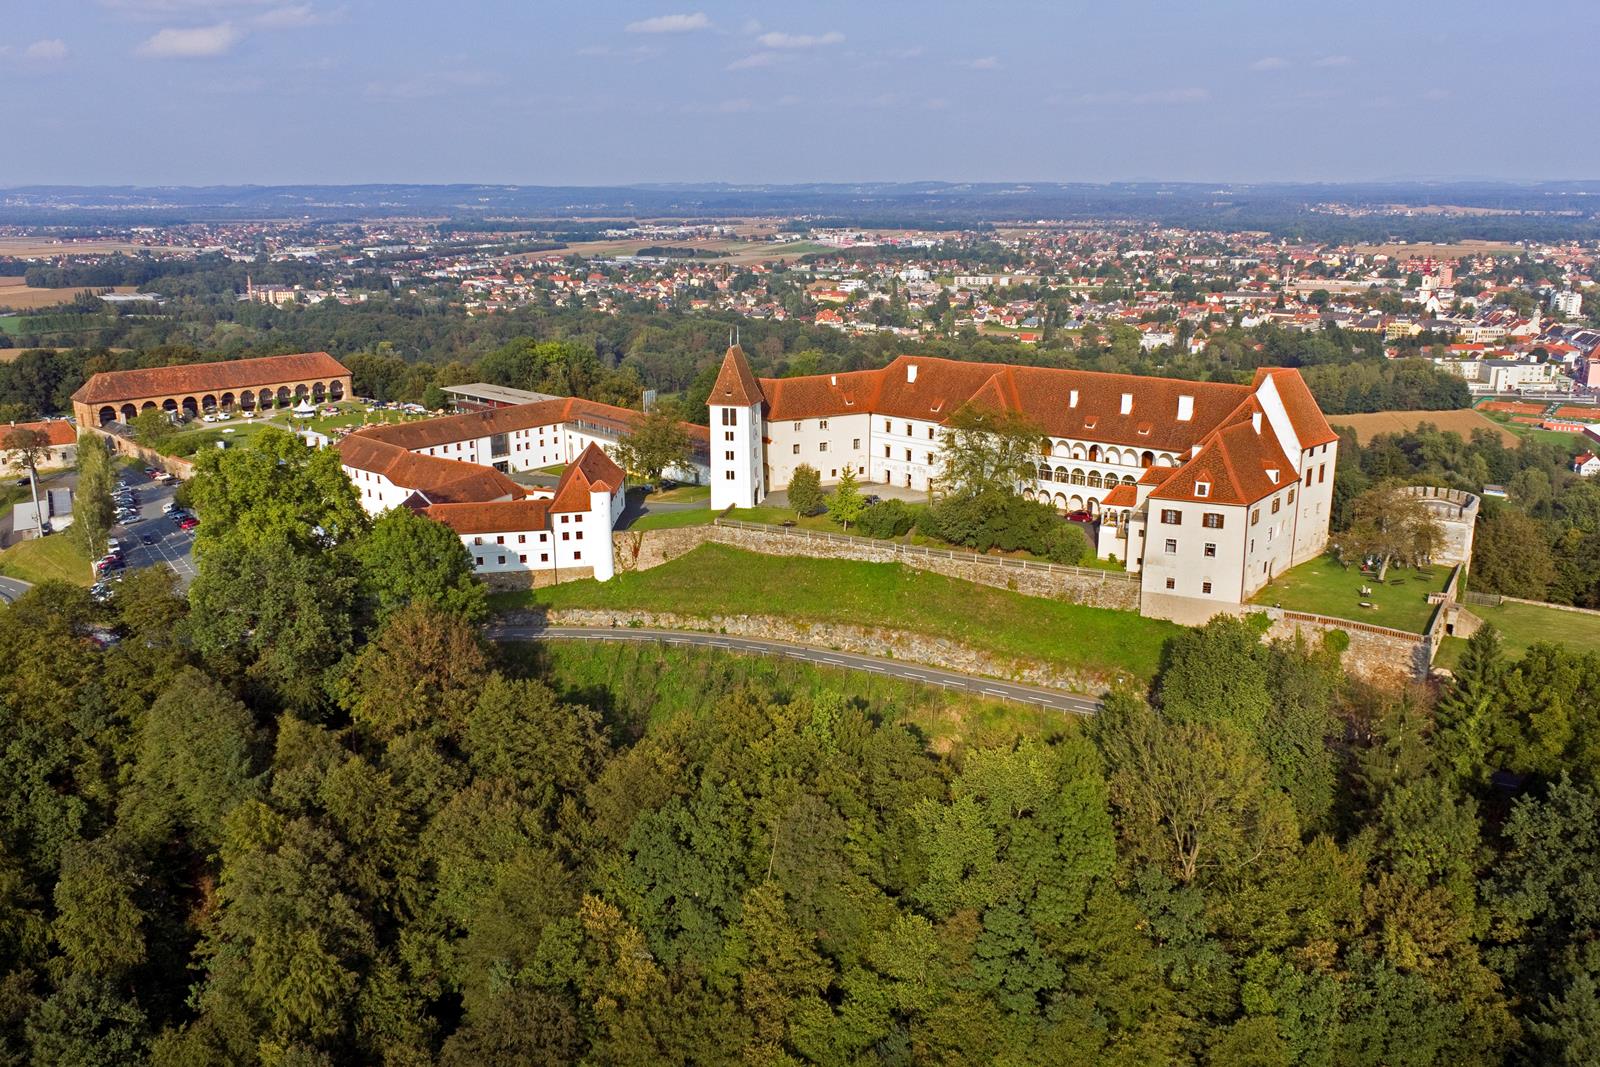 Flight shot of the surrounding of Schloss Seggau with view over Leibnitz and a forest